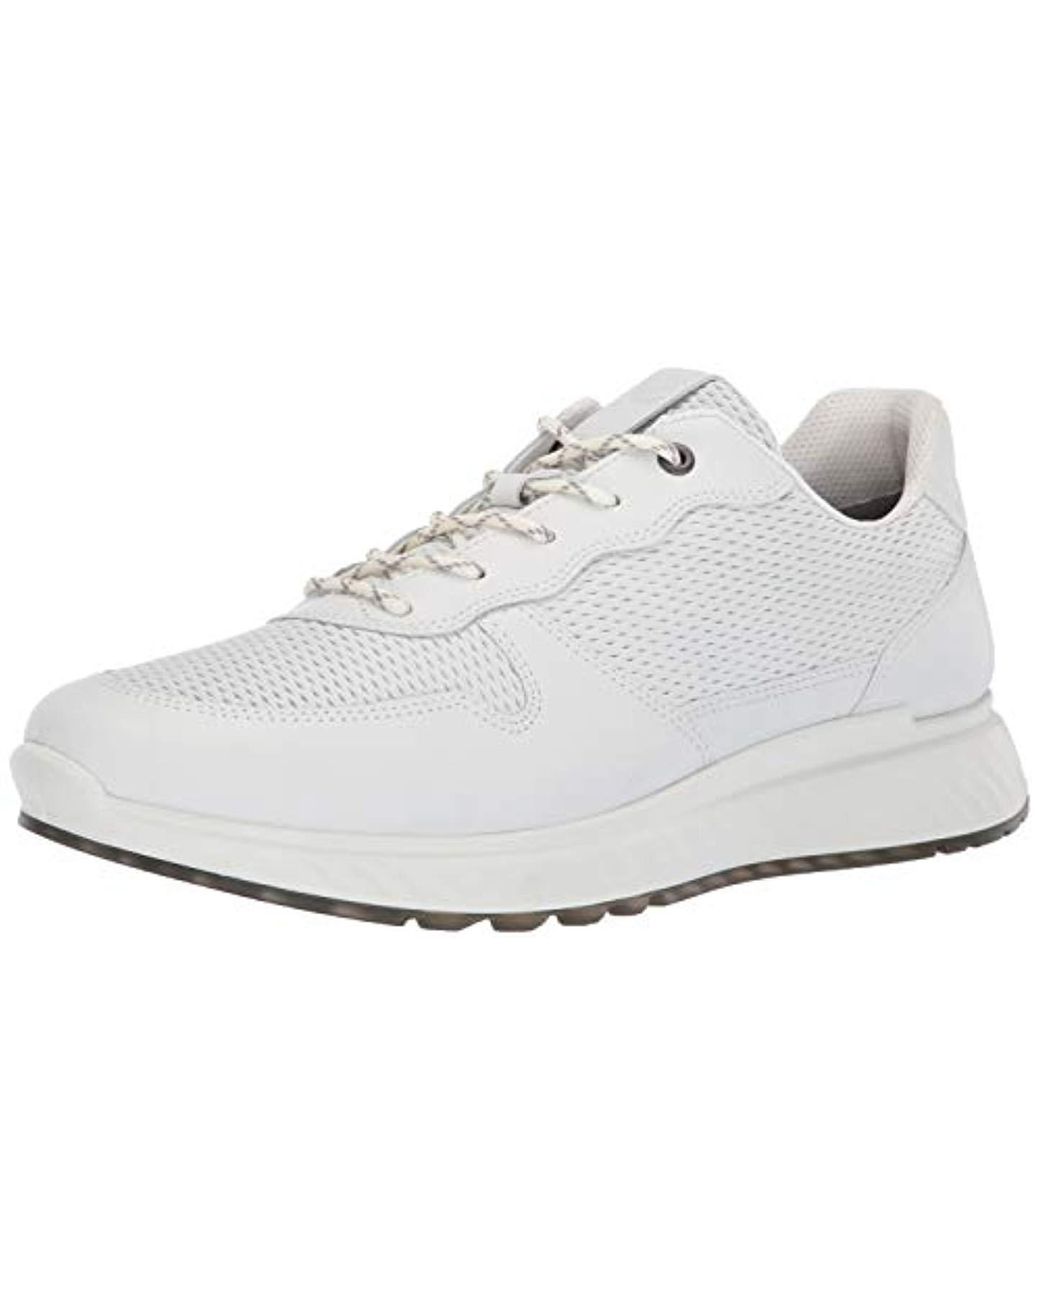 Ecco Leather St1 Sneaker in White for Men - Lyst